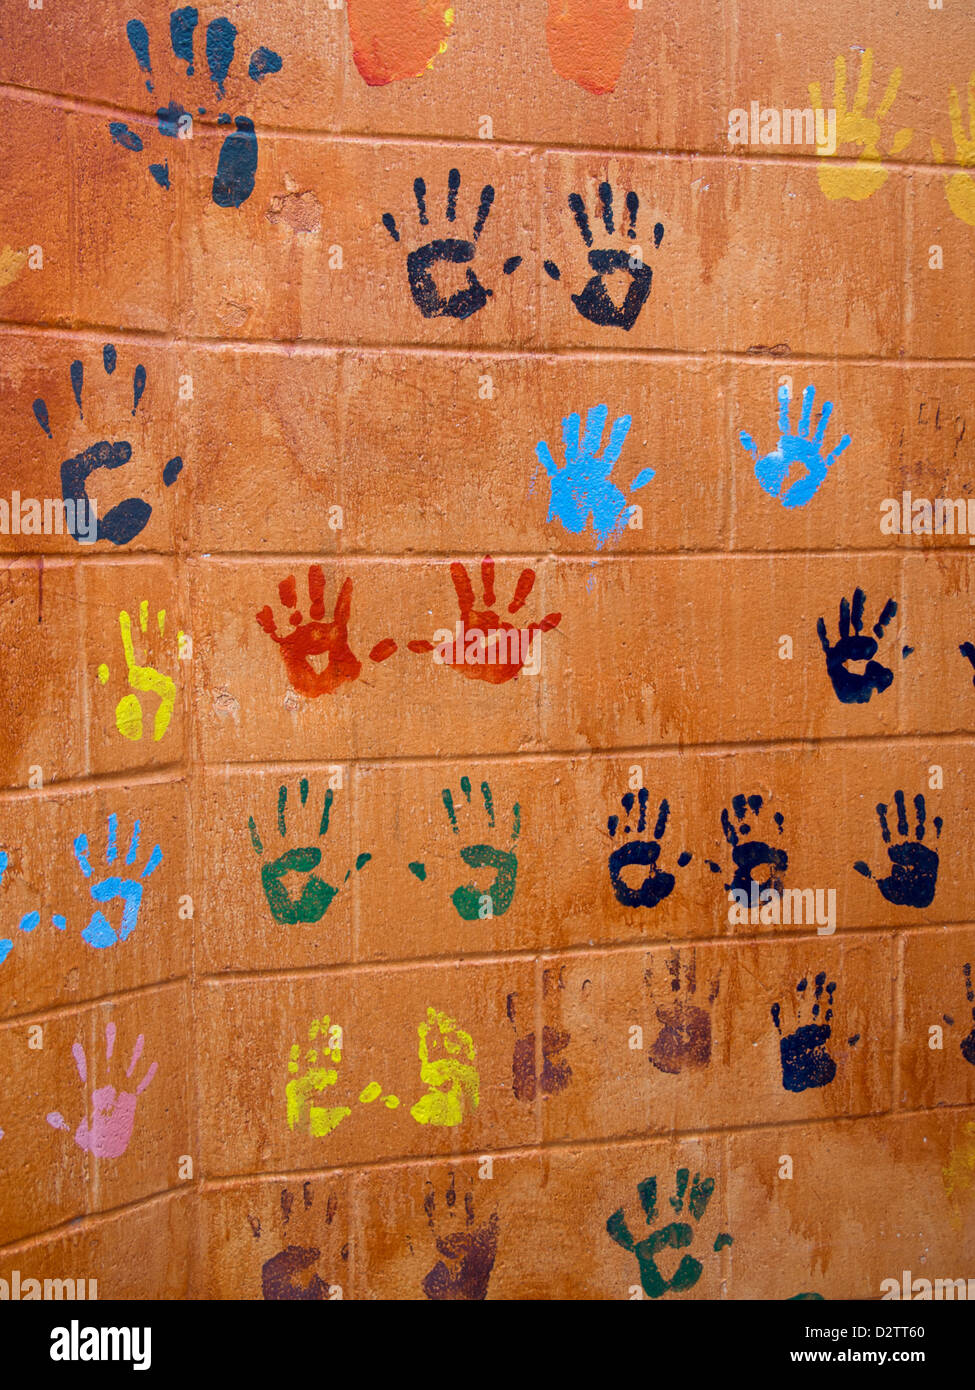 Colorful childrens' handprints on an orange wall in Austin, Texas Stock Photo